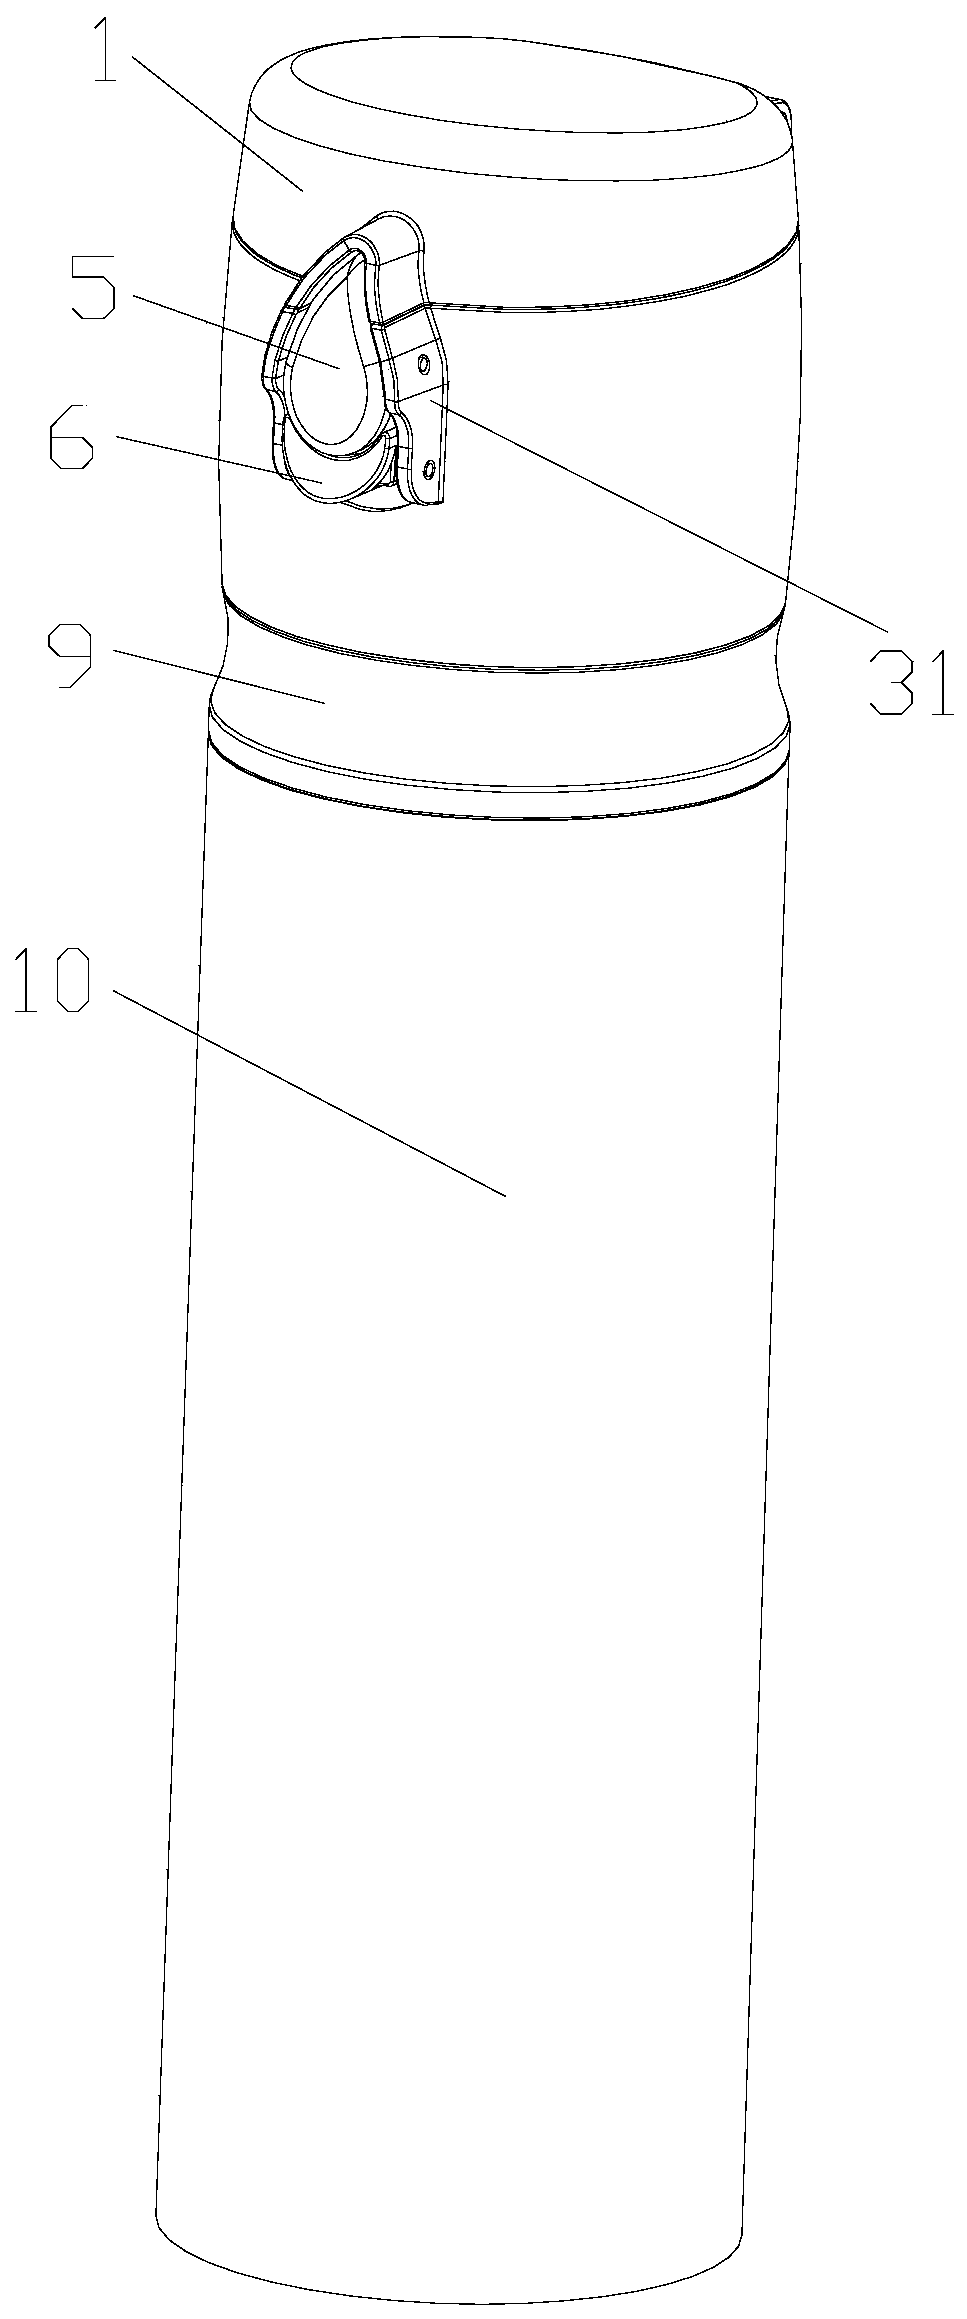 Lid and container